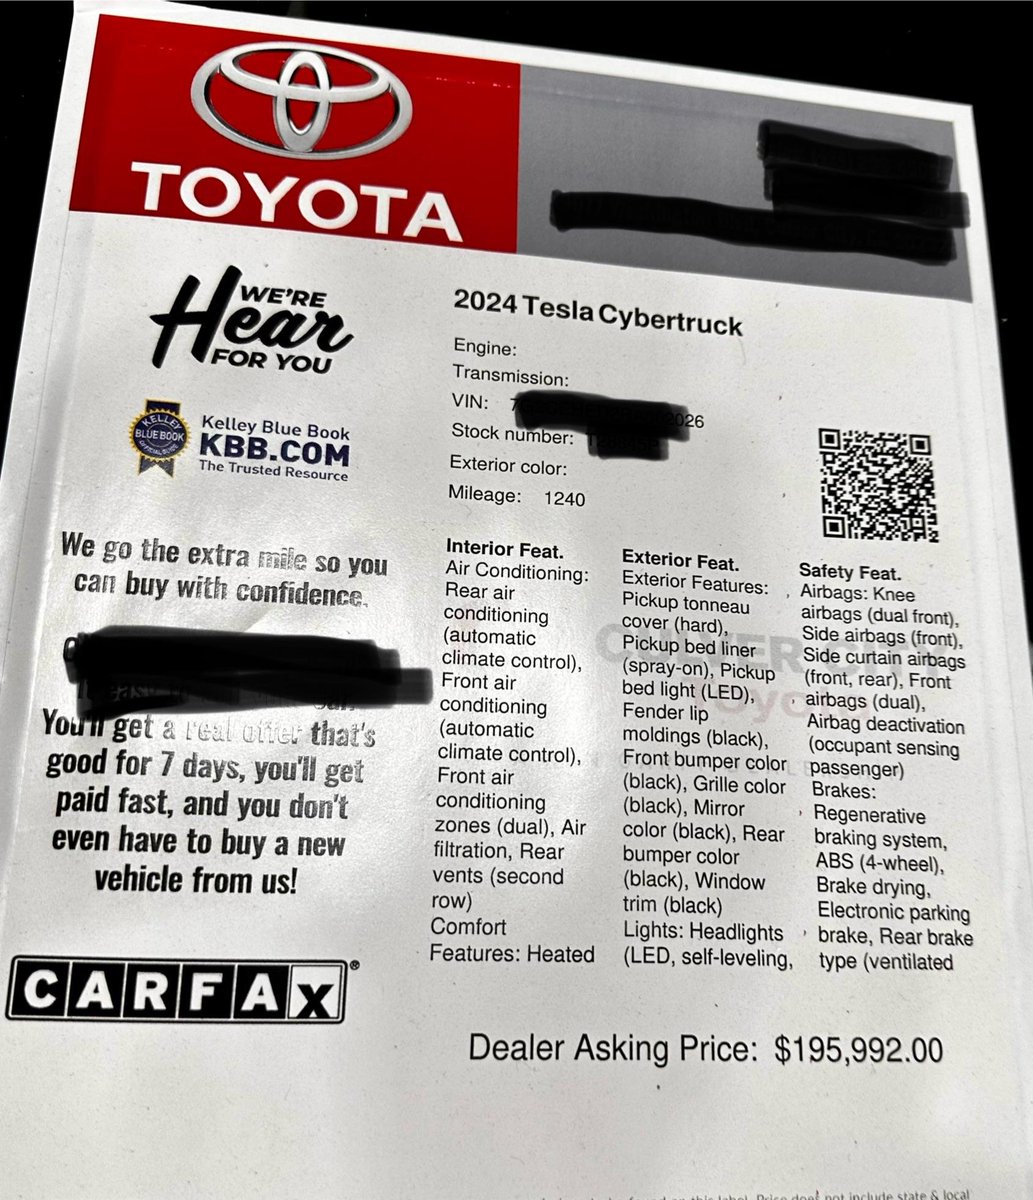 Guy traded his clustertruck in on a new Toyota Tacoma after just 1200 miles. Said he hated it. Dealer was asking $195k yesterday, but already marked it down $20k today.